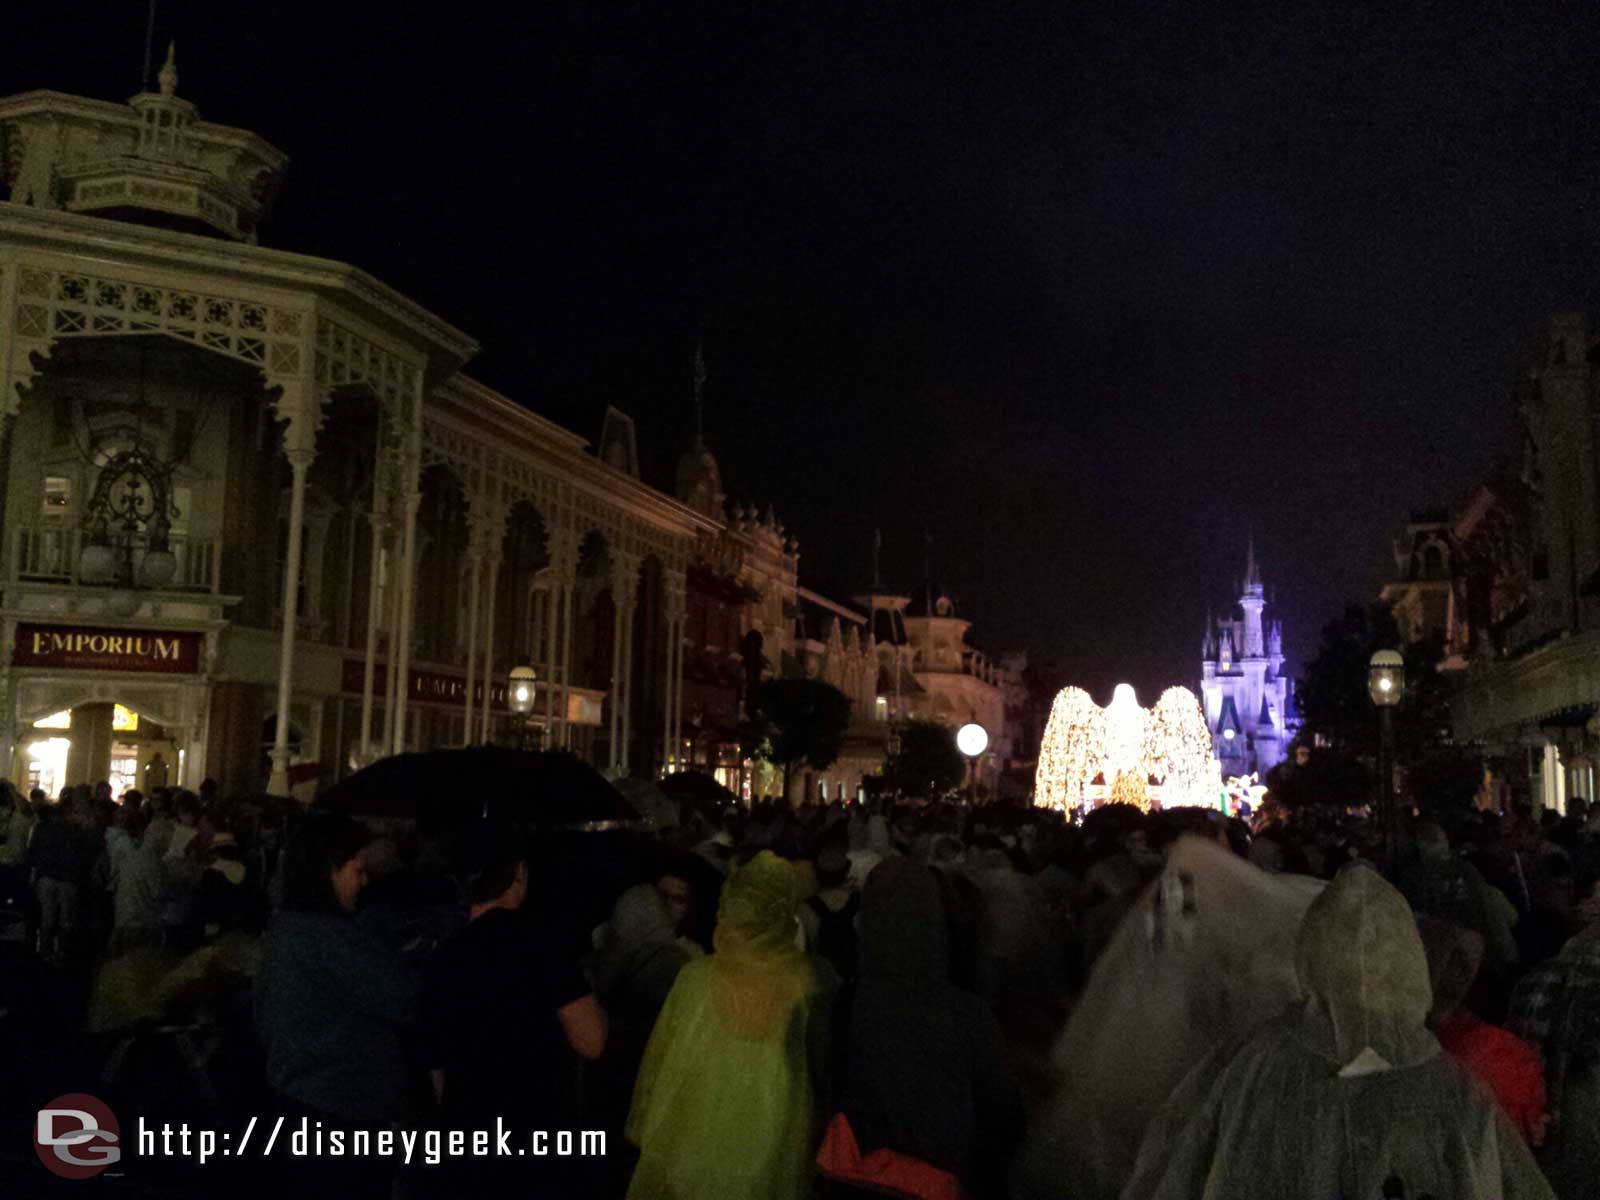 As the parade made its way up Main Street the rain started to fall harder.